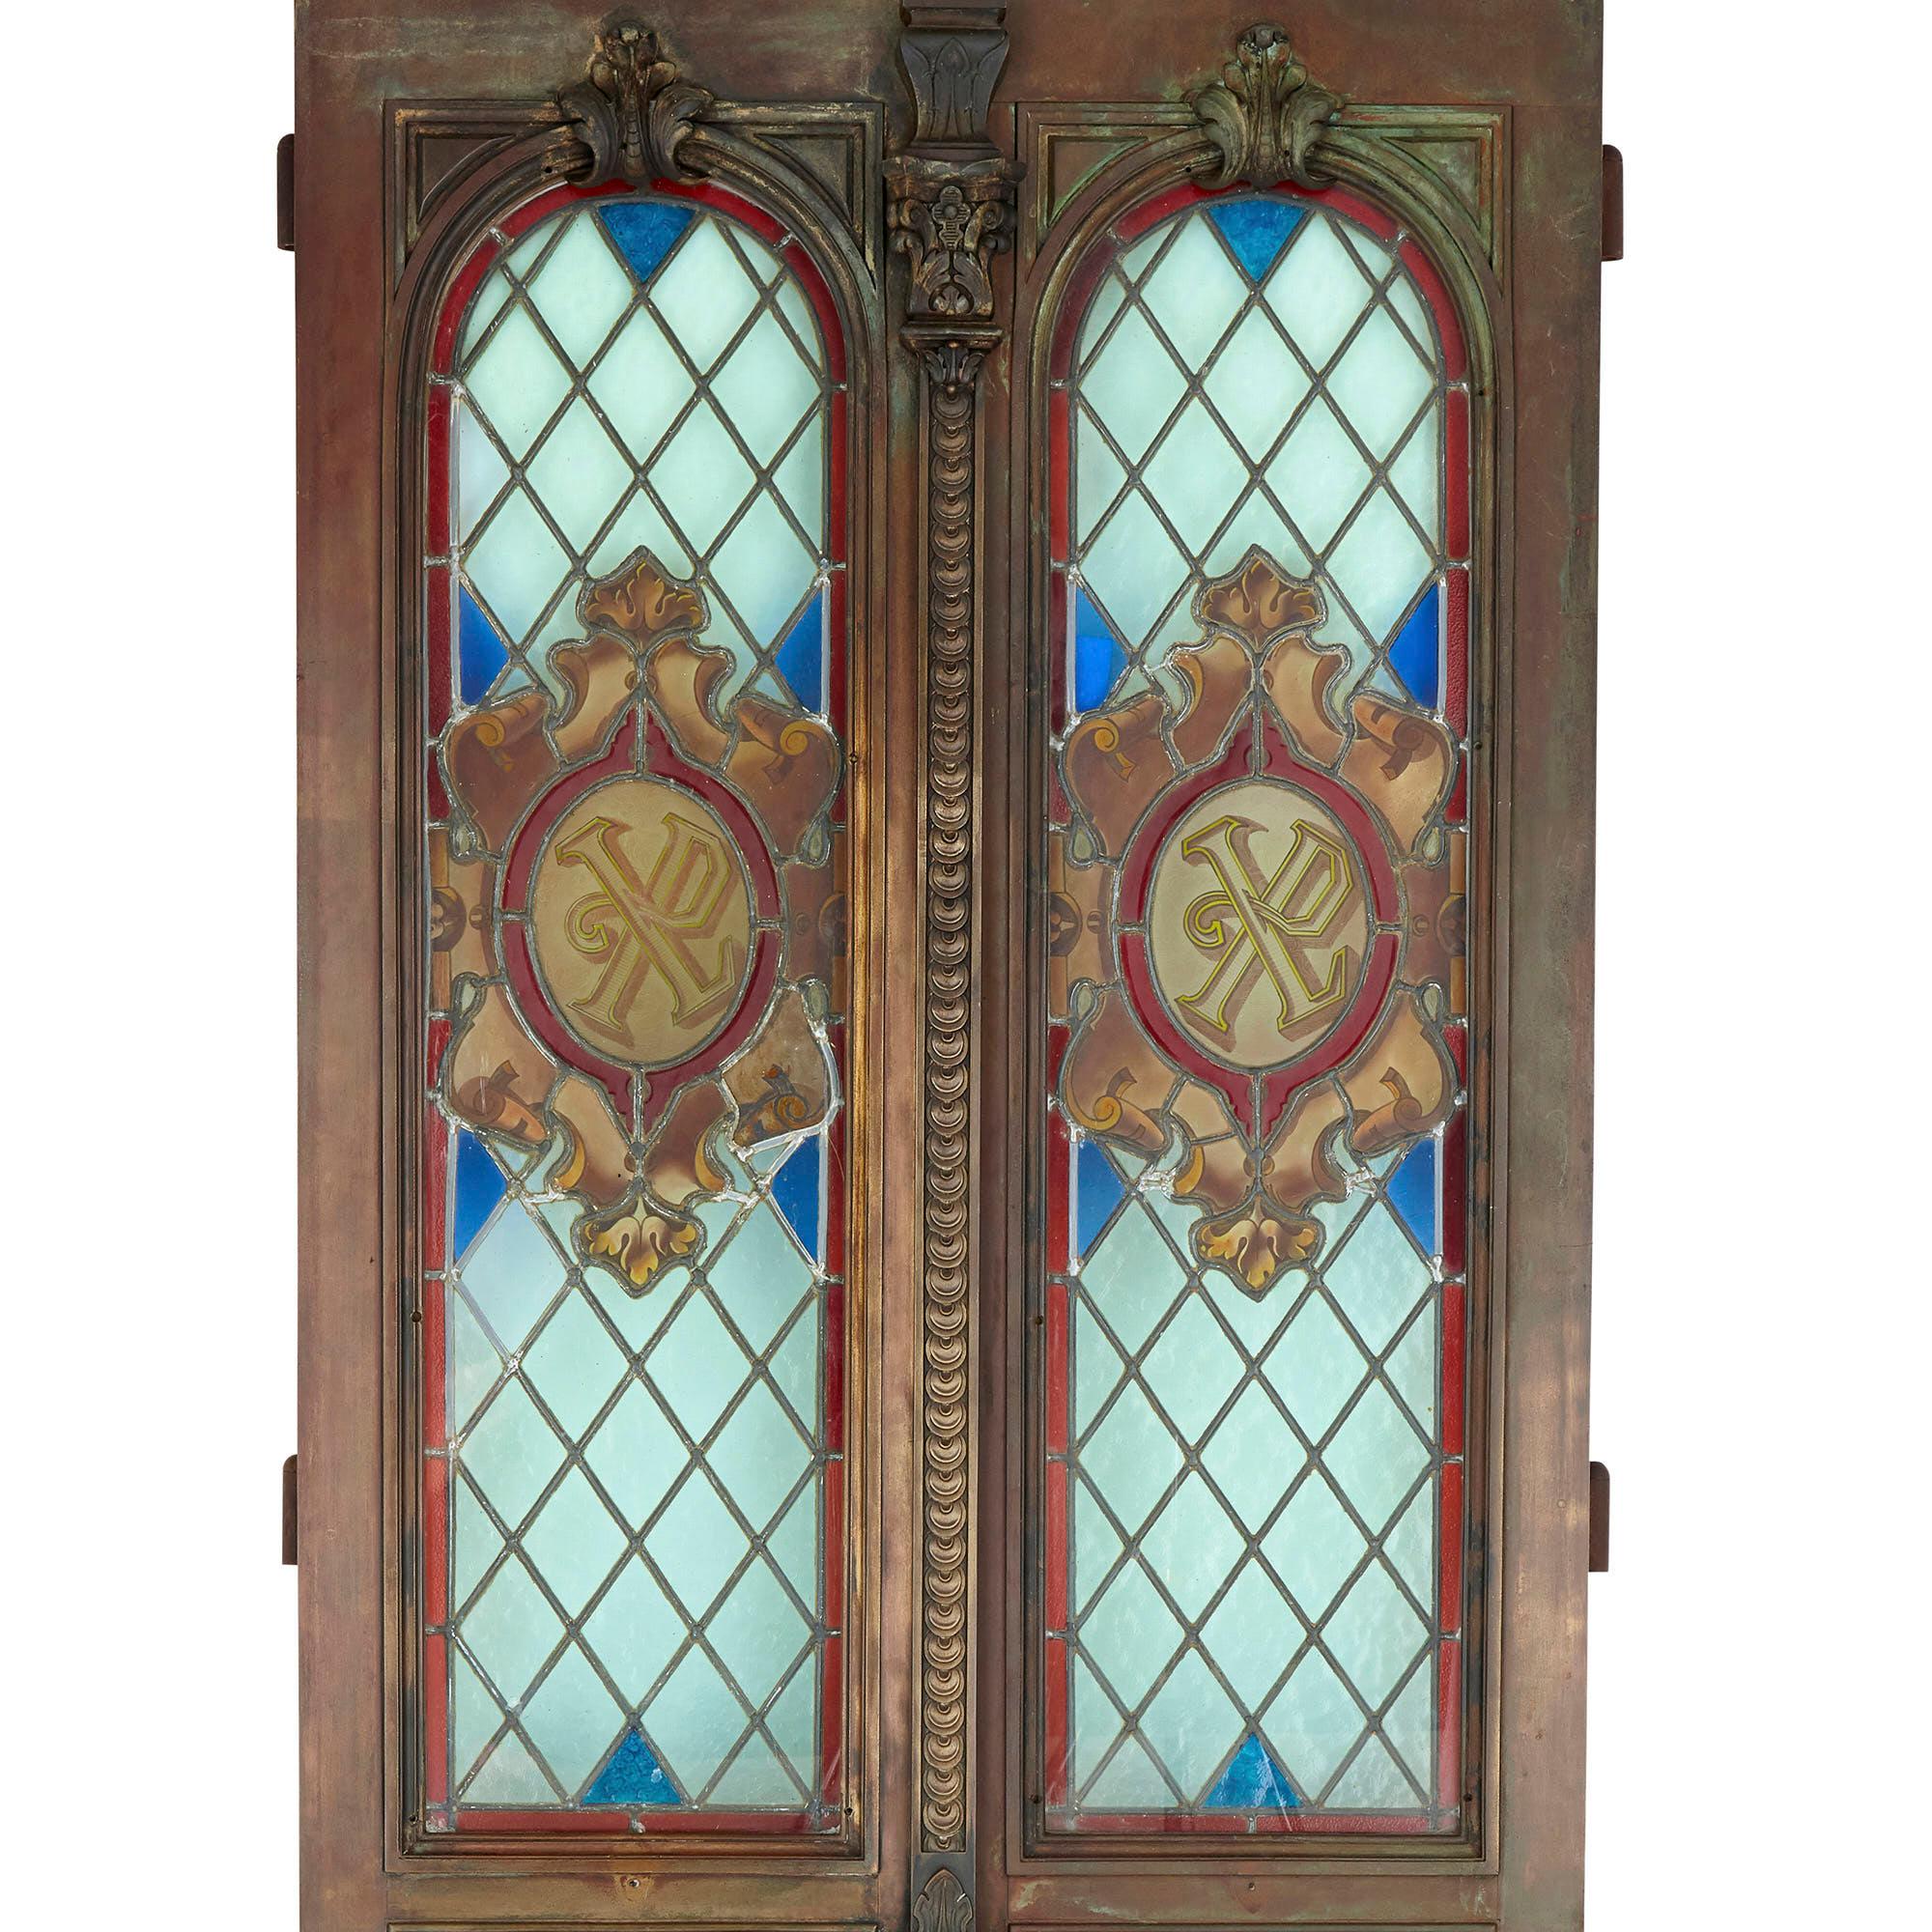 French Belle Époque bronze and stained glass doors
French, 1896
Each door: Height 210cm, width 41cm (82cm when together), depth 10cm

This magnificent pair of doors is crafted from bronze and stained glass. Each door contains arched-top